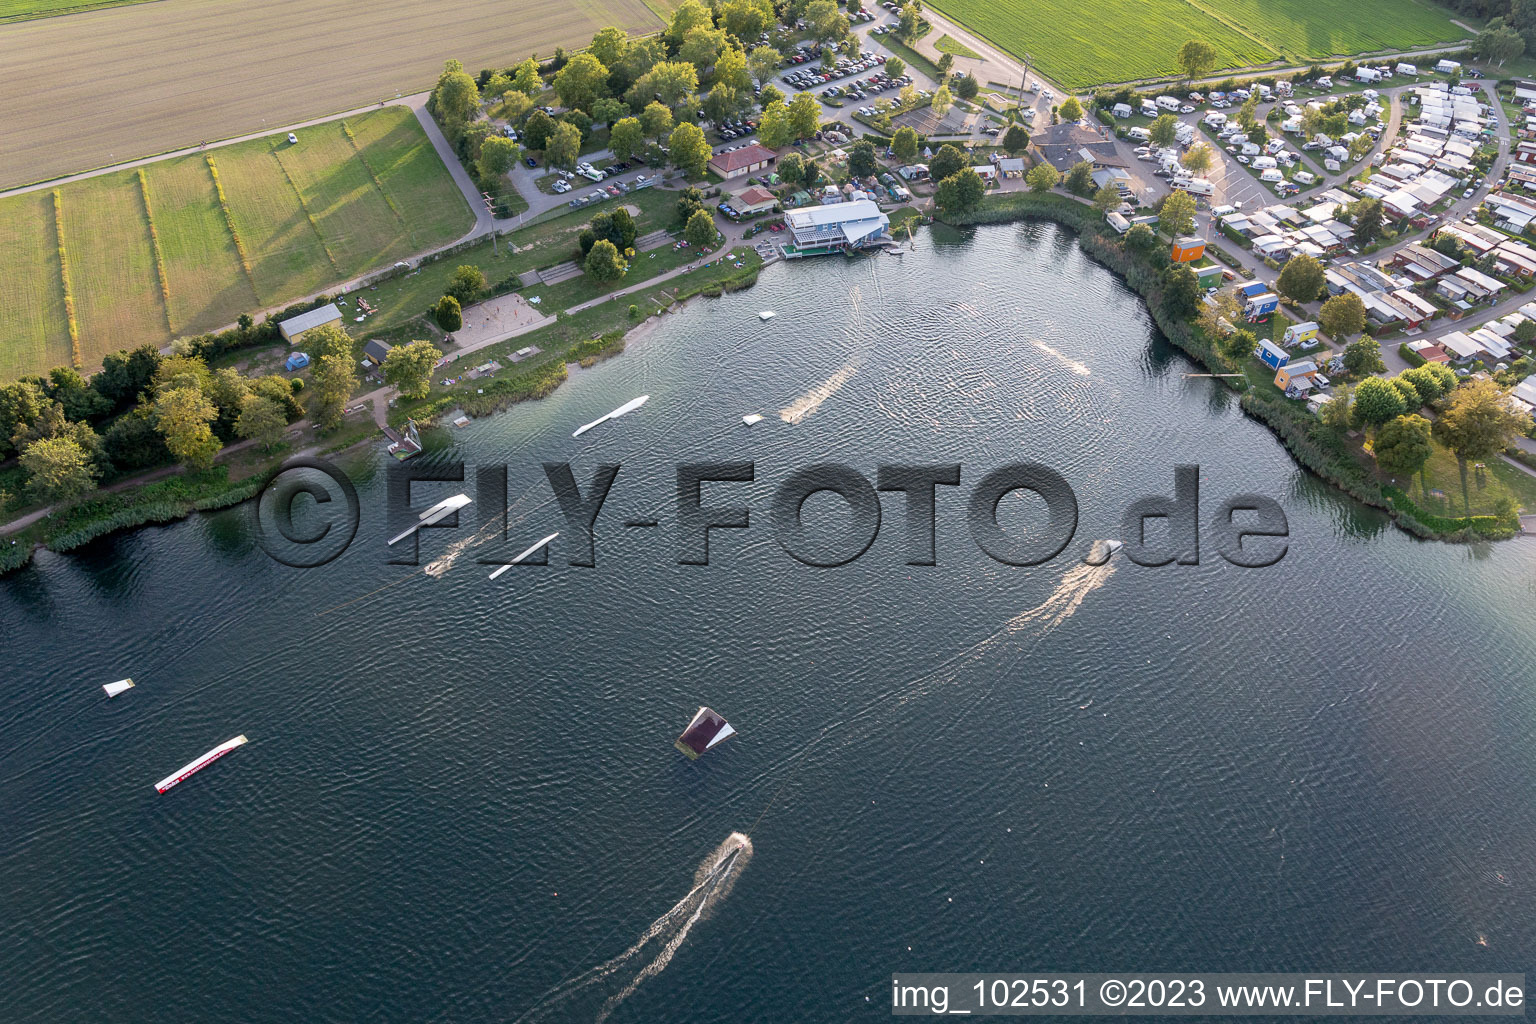 St. Leoner See, water ski facility in the district Sankt Leon in St. Leon-Rot in the state Baden-Wuerttemberg, Germany seen from a drone